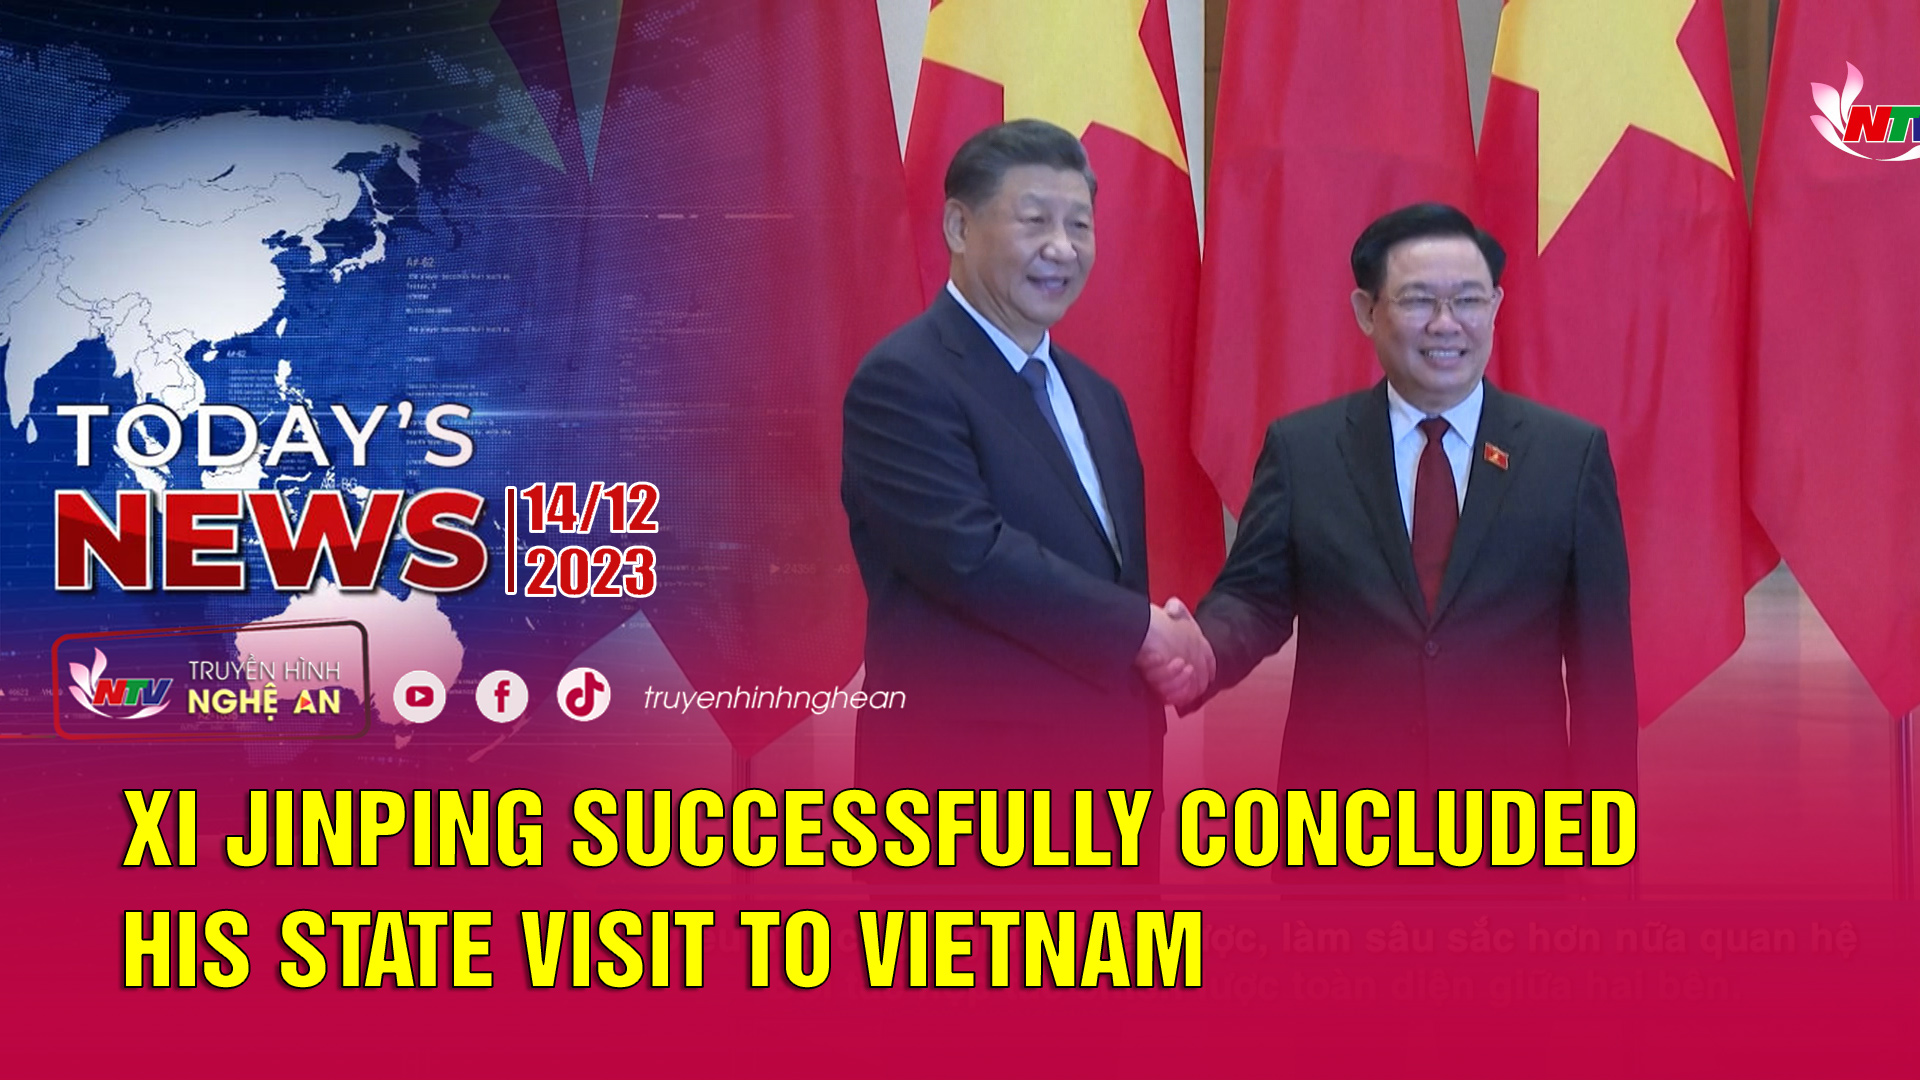 Today's News - 14/12/2023: Xi Jinping successfully concluded his state visit to Vietnam